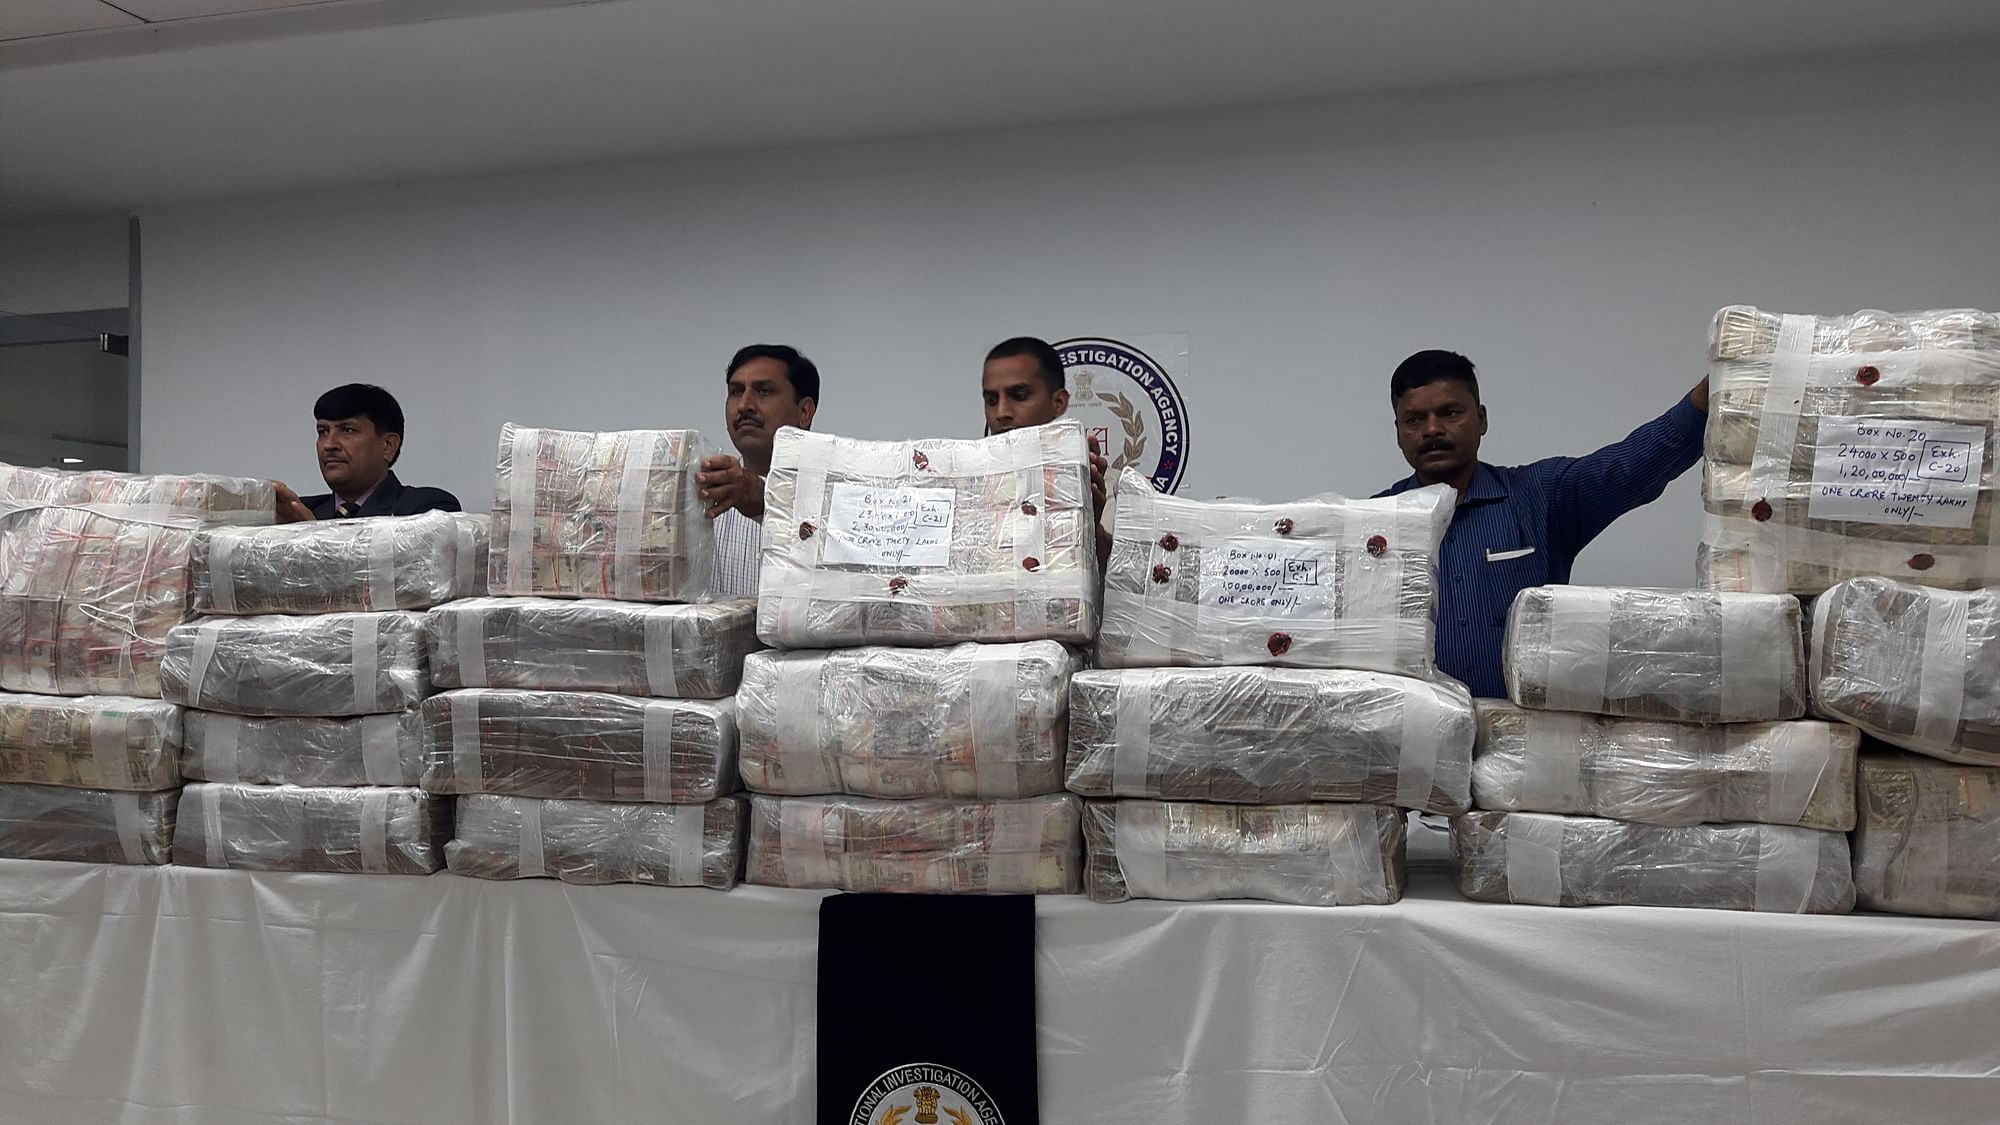 NIA seized Rs 36,34,78,500 in demonetised notes on Tuesday, 7 November.